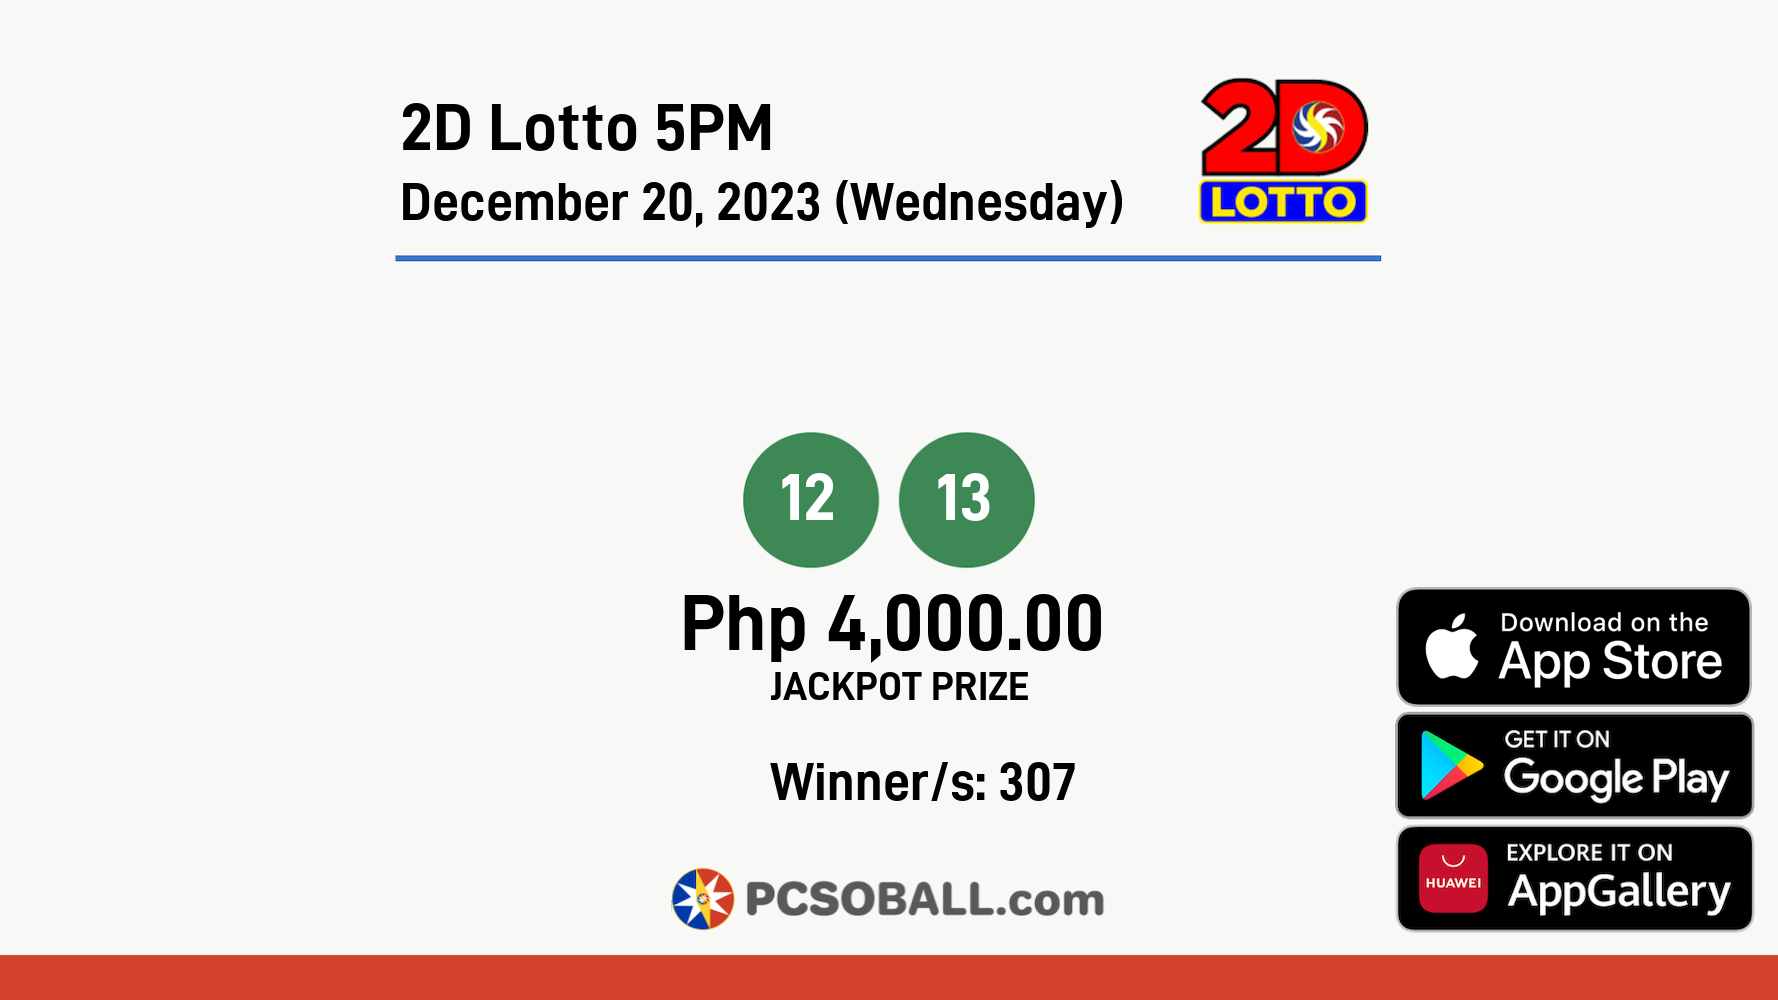 2D Lotto 5PM December 20, 2023 (Wednesday) Result